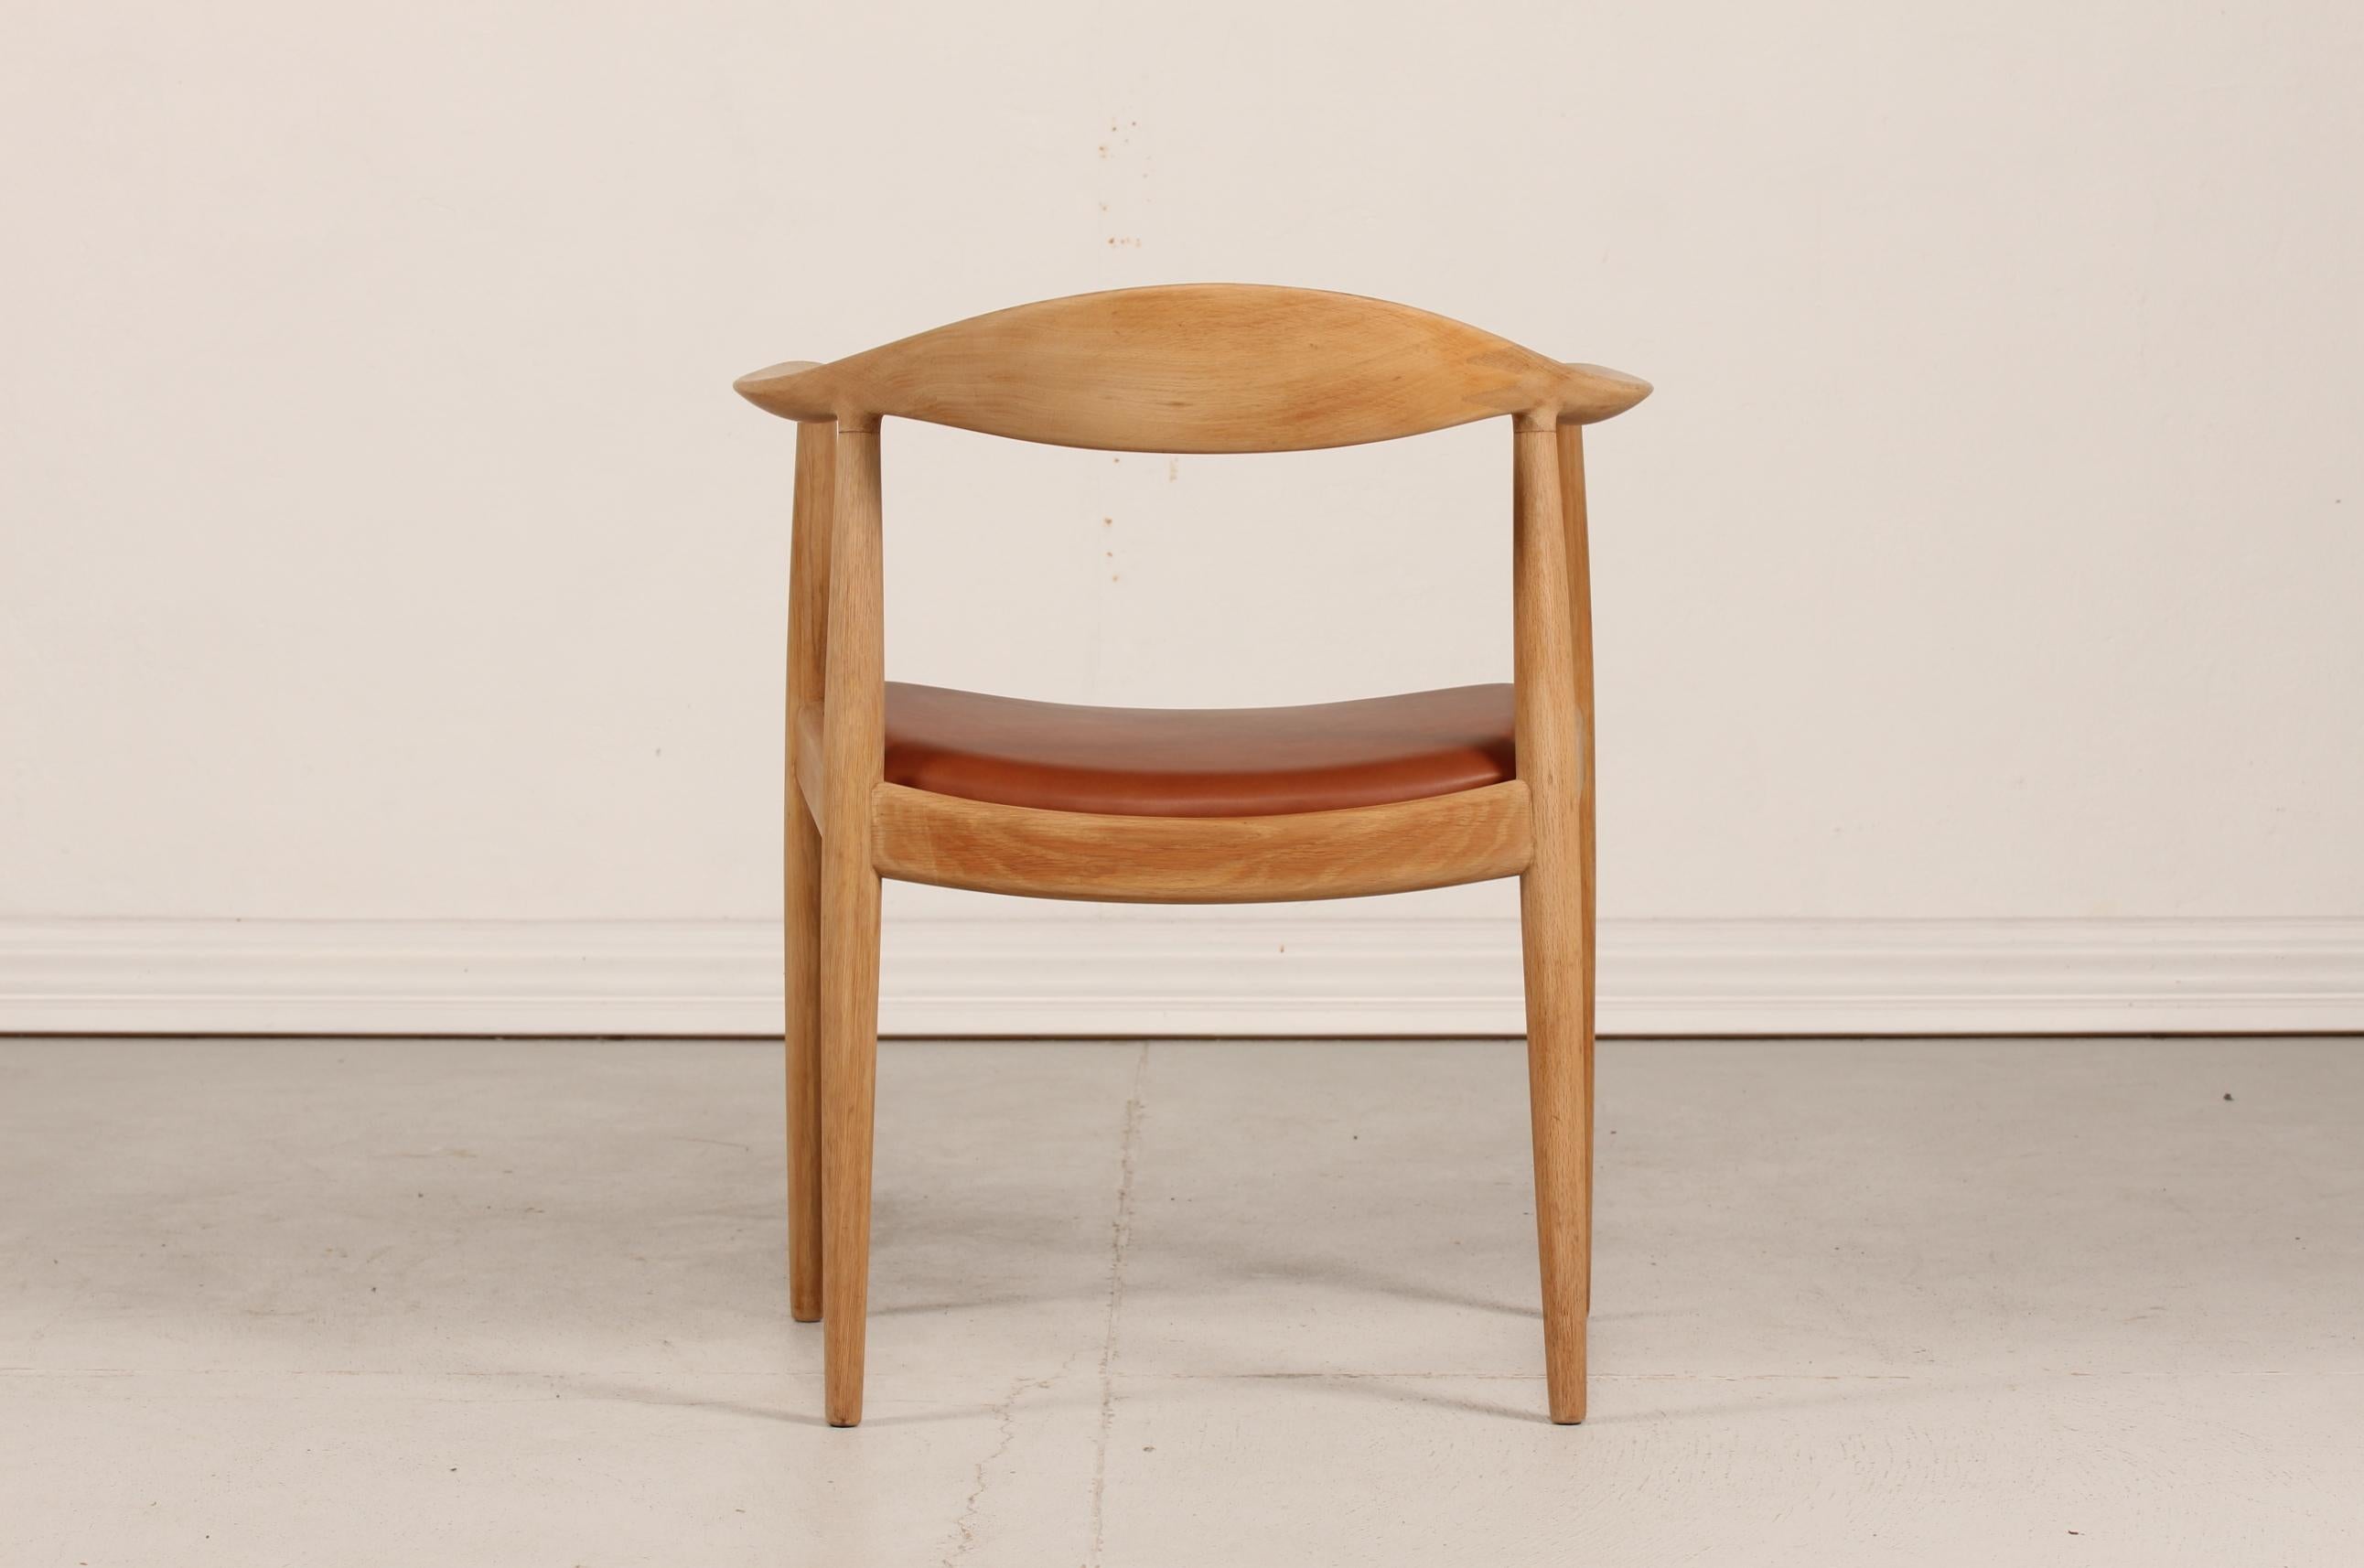 The chair or the round chair model 503 by Danish designer Hans J. Wegner in 1950.
It's made of genuine oak with soap treatment and has got a new aniline walnut colored leather seat cover.
Backstamp under the seat in the frame for the manufacturer